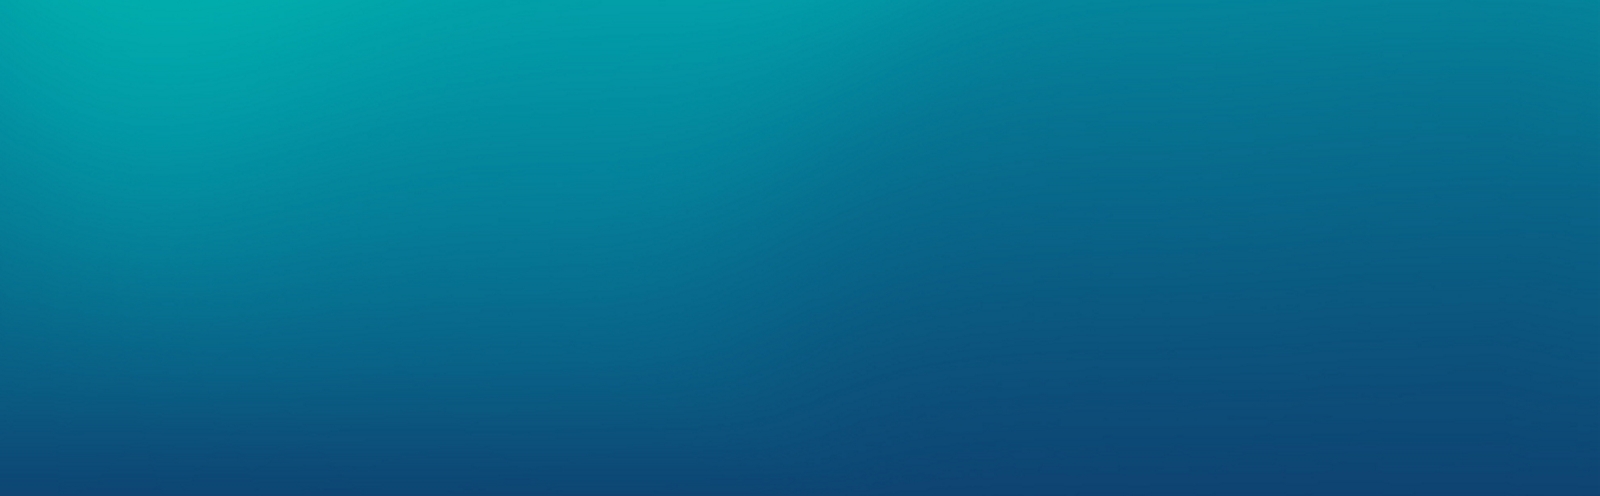 A smooth gradient background transitioning from dark to light blue top to bottom.